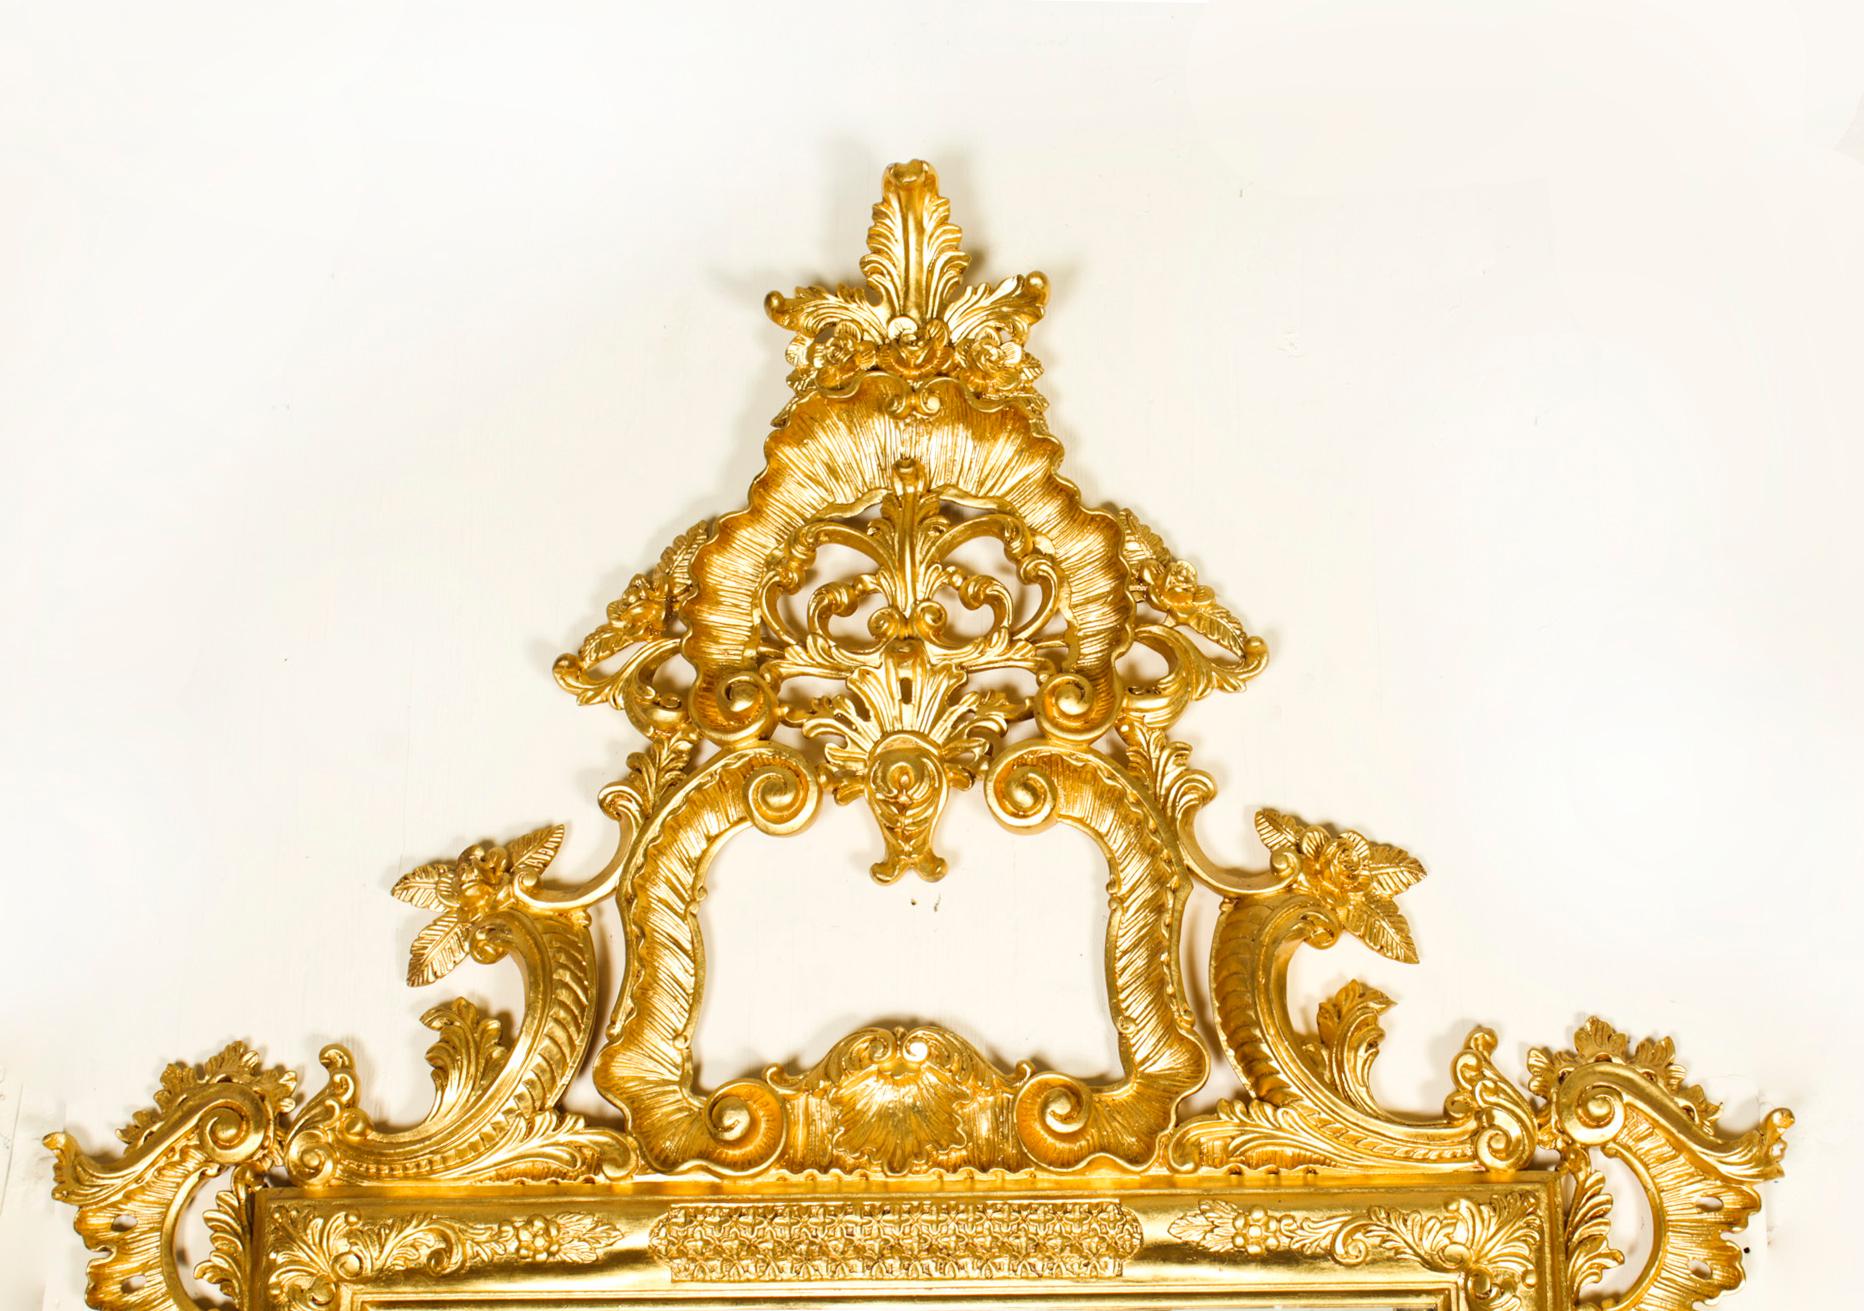 This is a finely hand carved monumental Italian Rococo Revival giltwood mirror, dating from the late 20th century.

It features a large exaggerated central multi directional pieced acanthus leaf cartouche crest. The outset corners have decorative